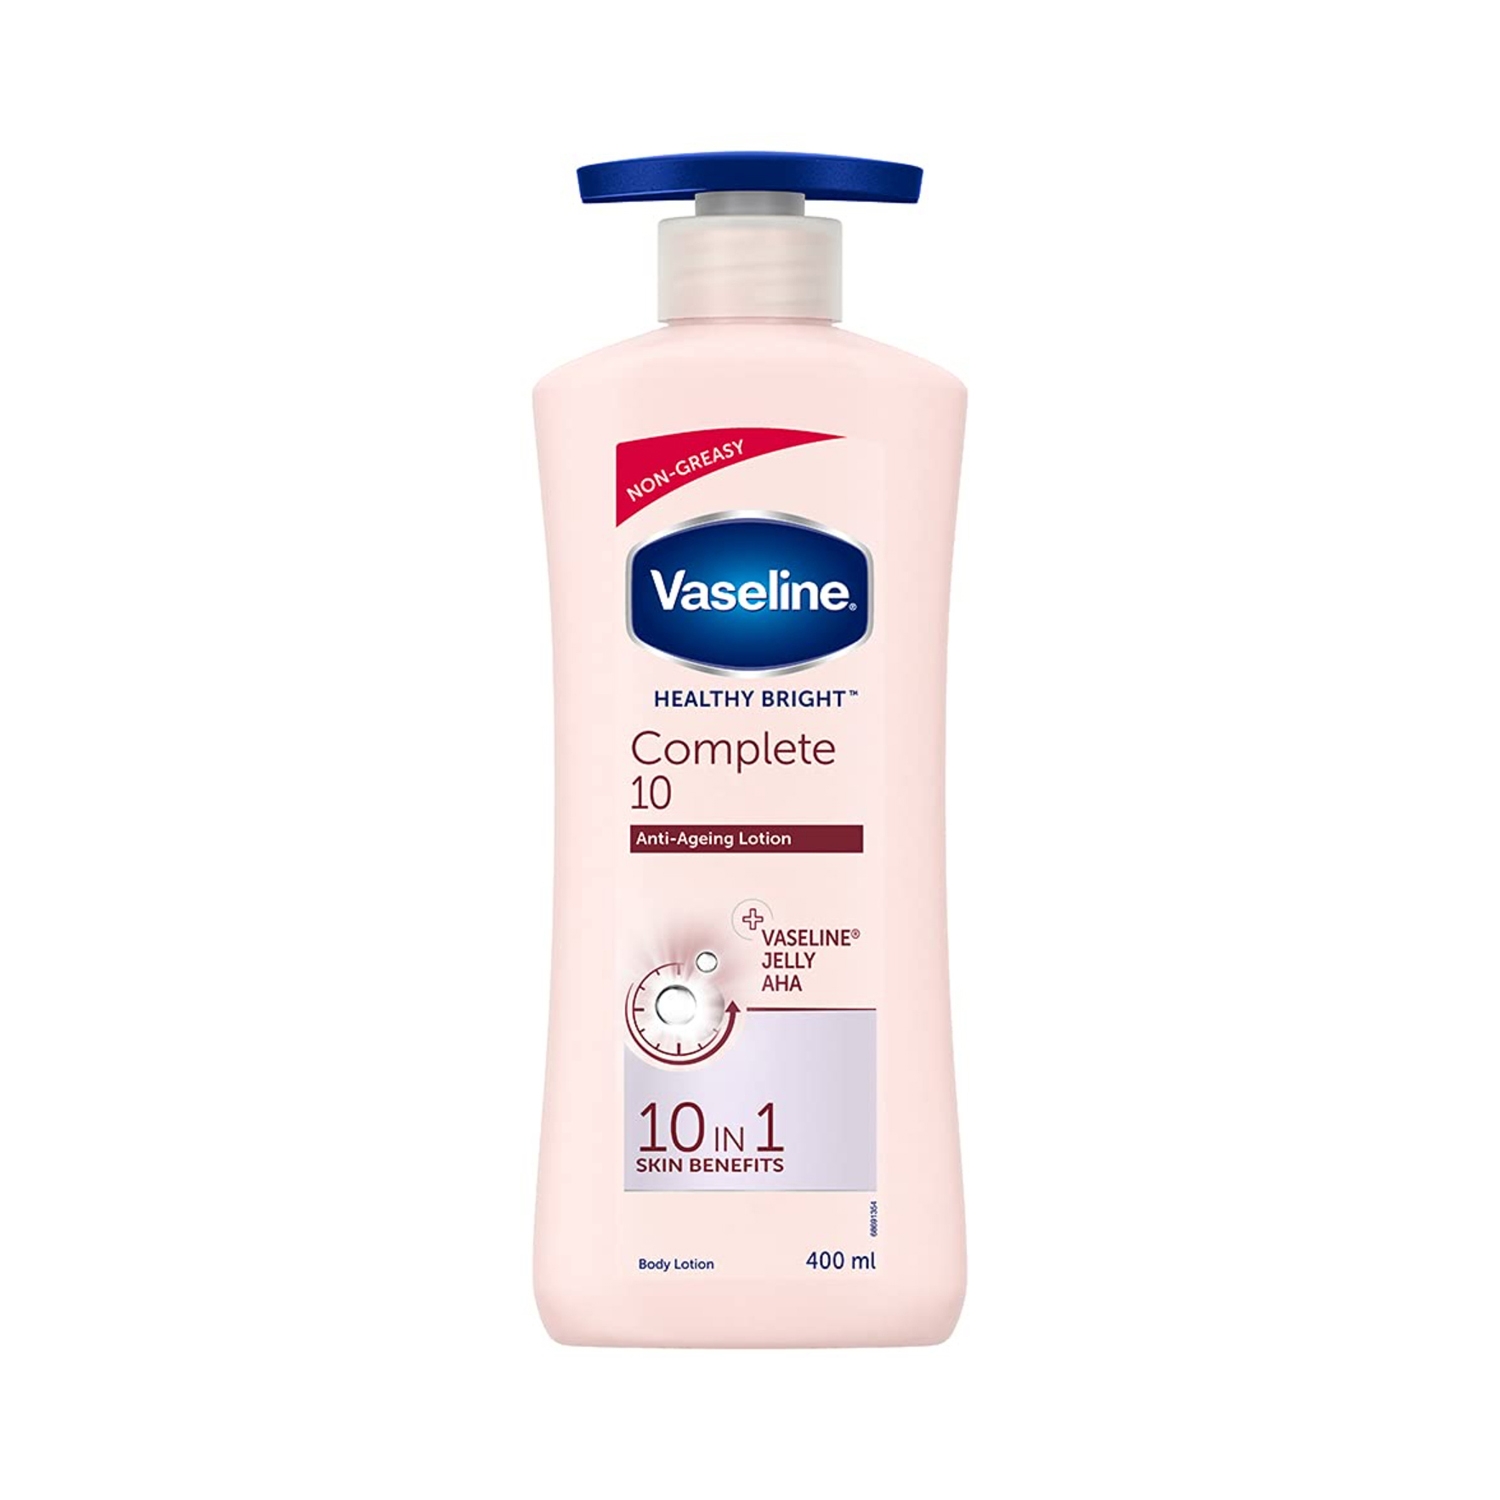 Vaseline | Vaseline Healthy Bright Complete 10 Anti-Ageing Body Lotion (400ml)